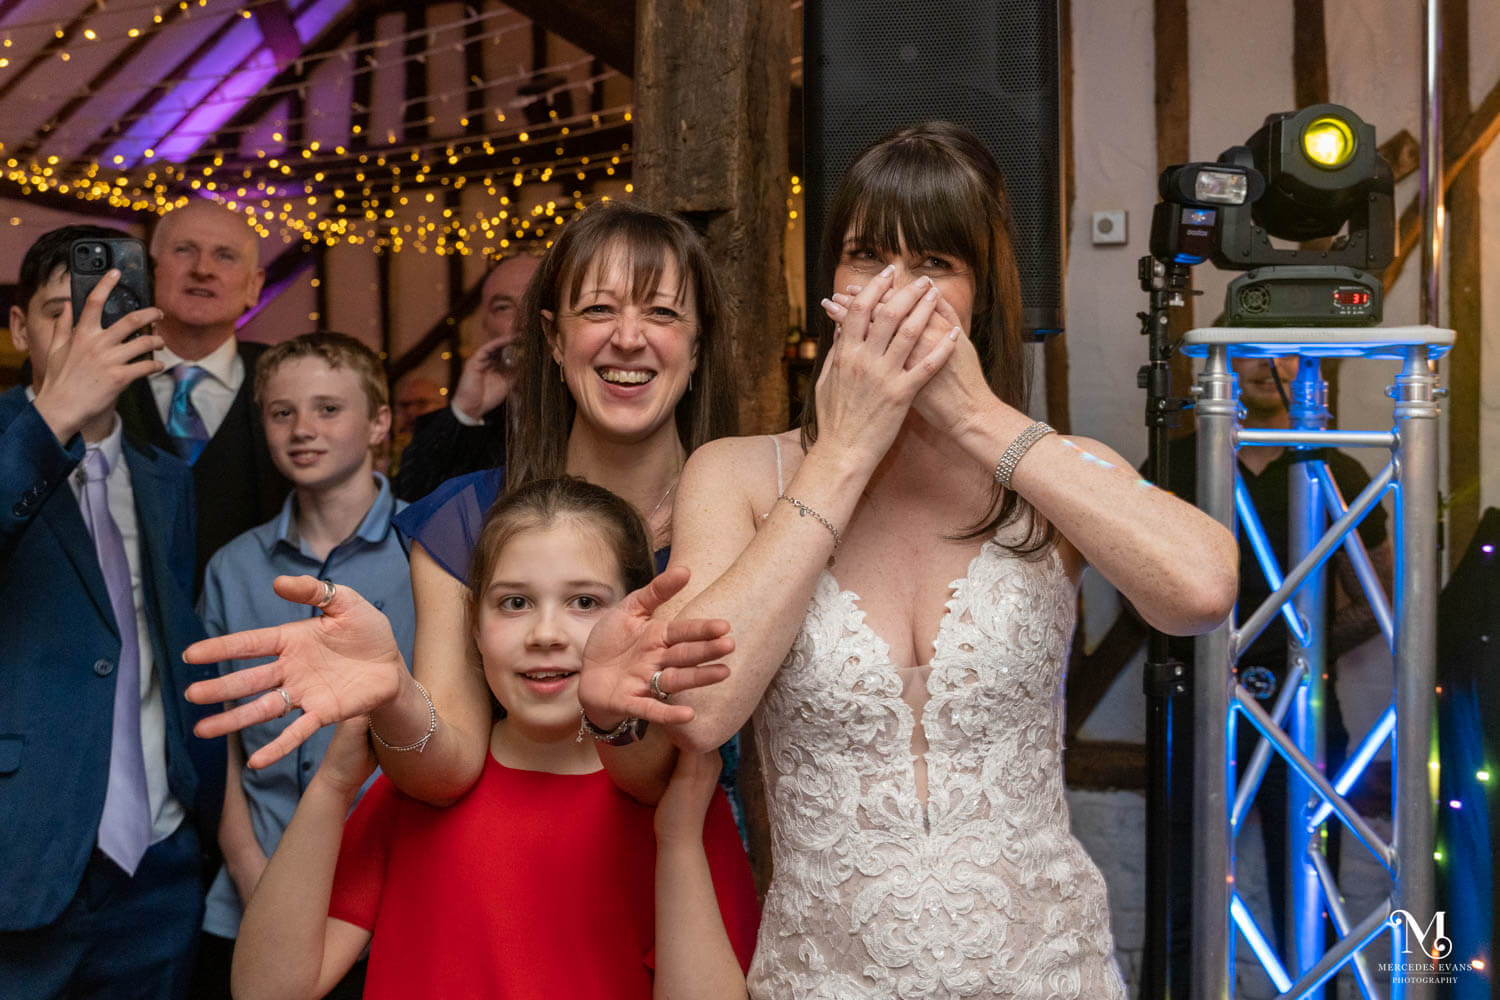 the bride puts her hands over her face and friends laugh and clap as they watch the dance routine